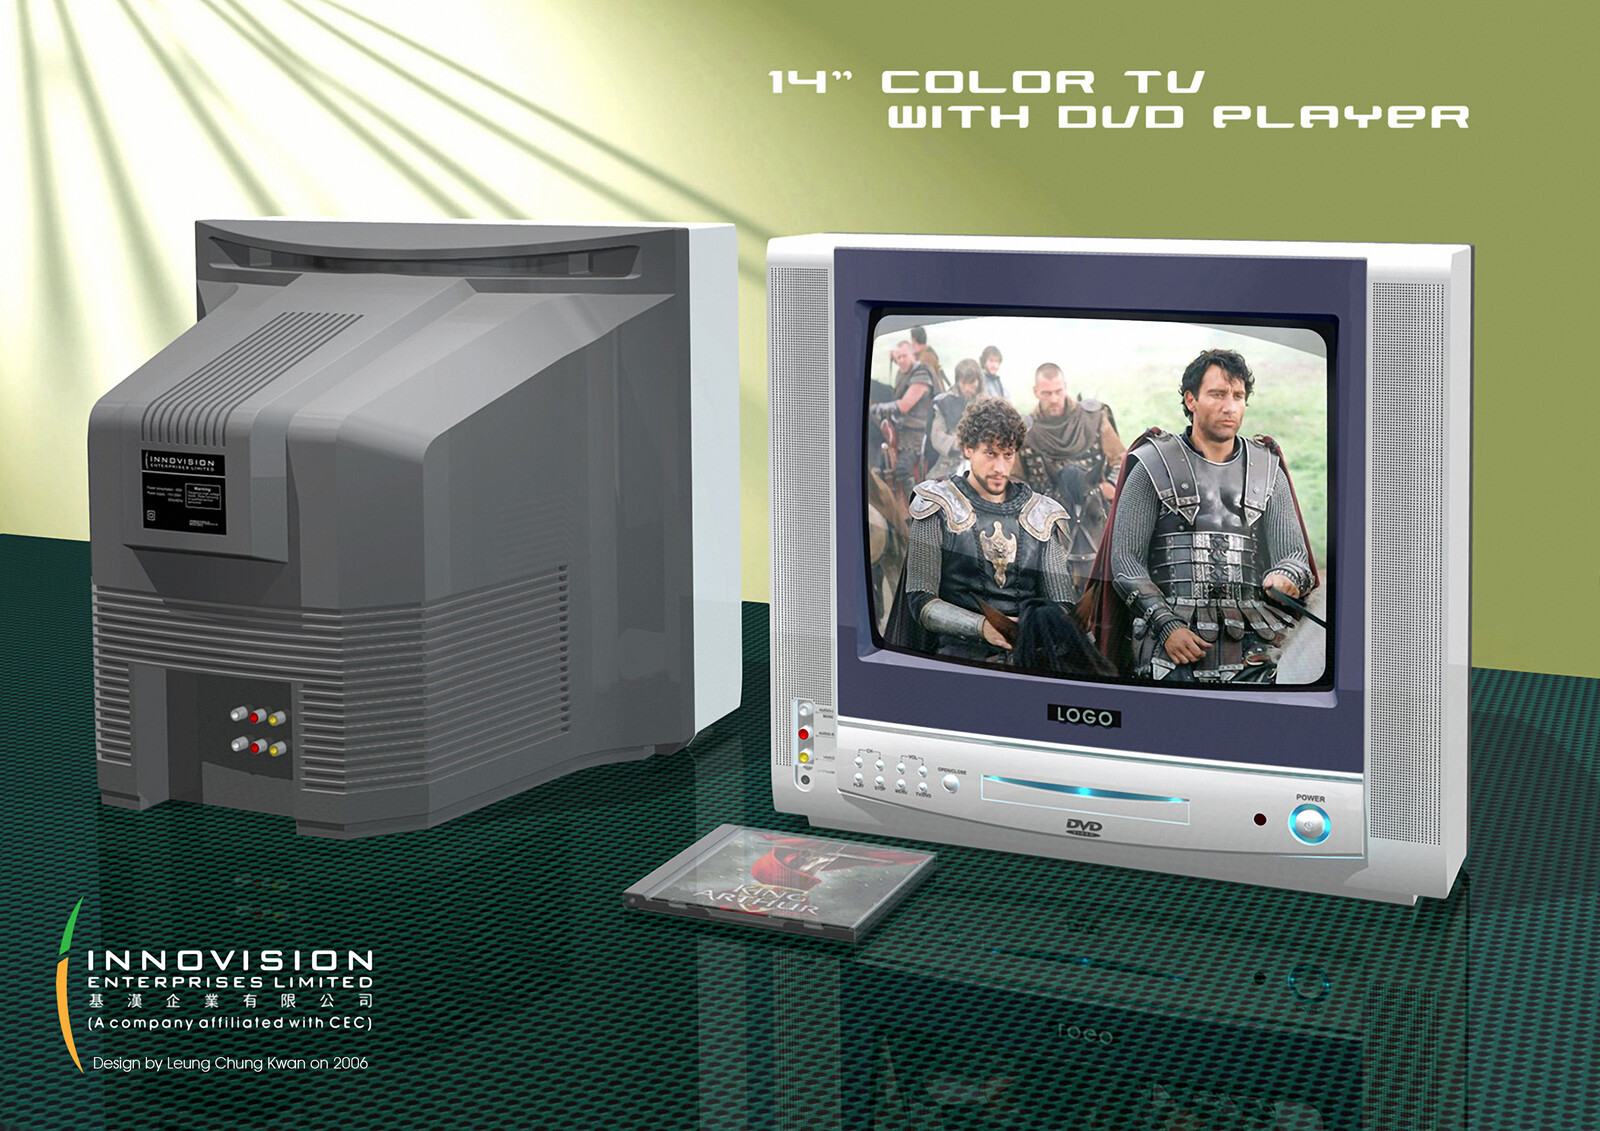 💎 CRT Color TV with DVD Player Combo | Design by Leung Chung Kwan on 2006 💎
Client︰Innovision Enterprises 